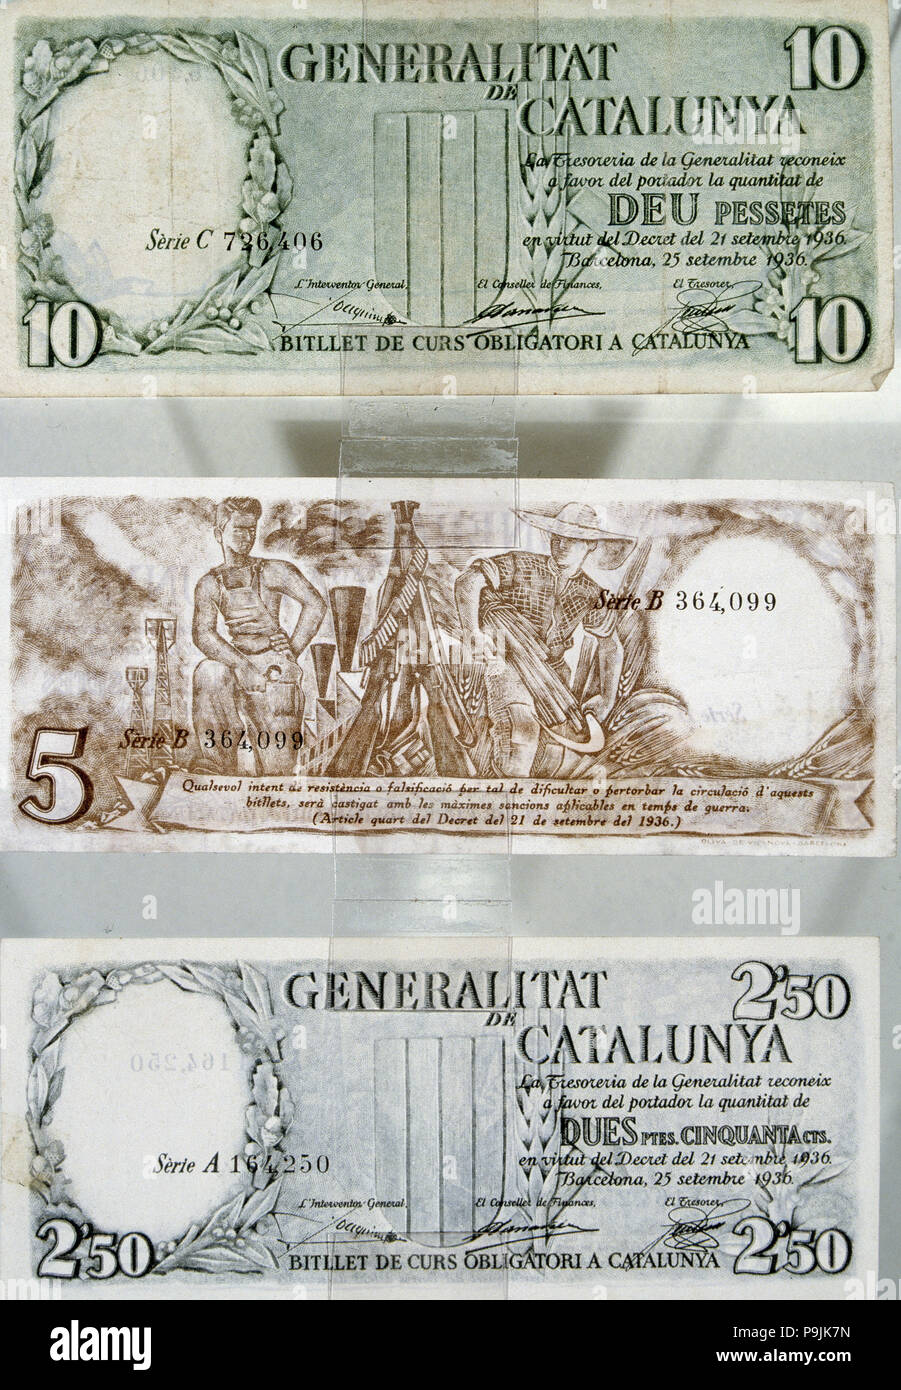 Banknotes of 10 pesetas of legal tender issued by the Generalitat de Catalonia during the Spanish… Stock Photo